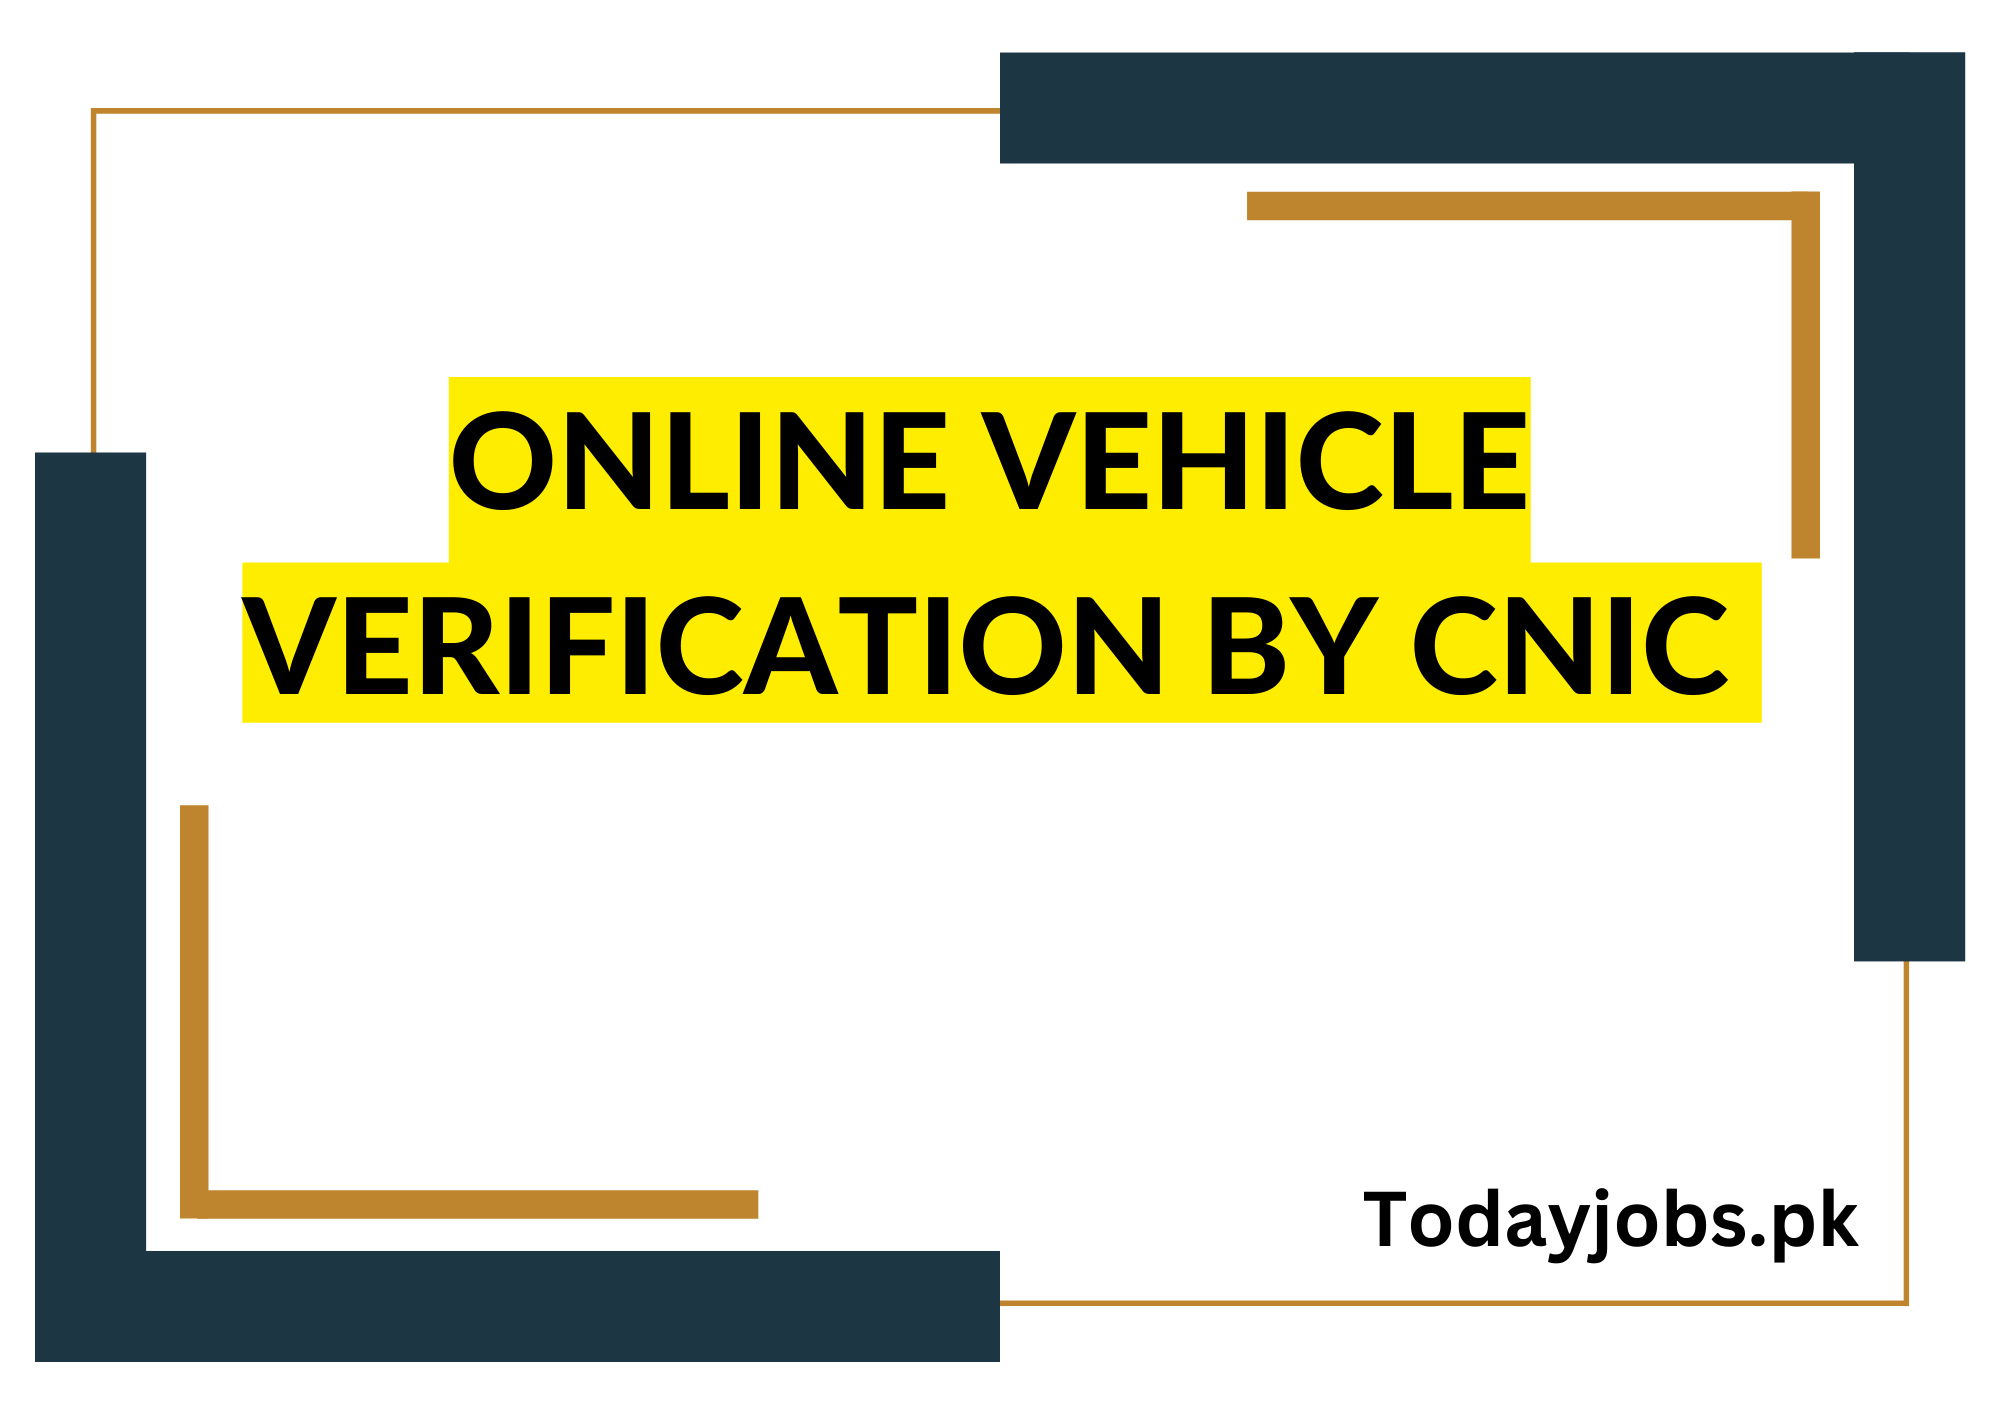 Online Vehicle Verification by CNIC